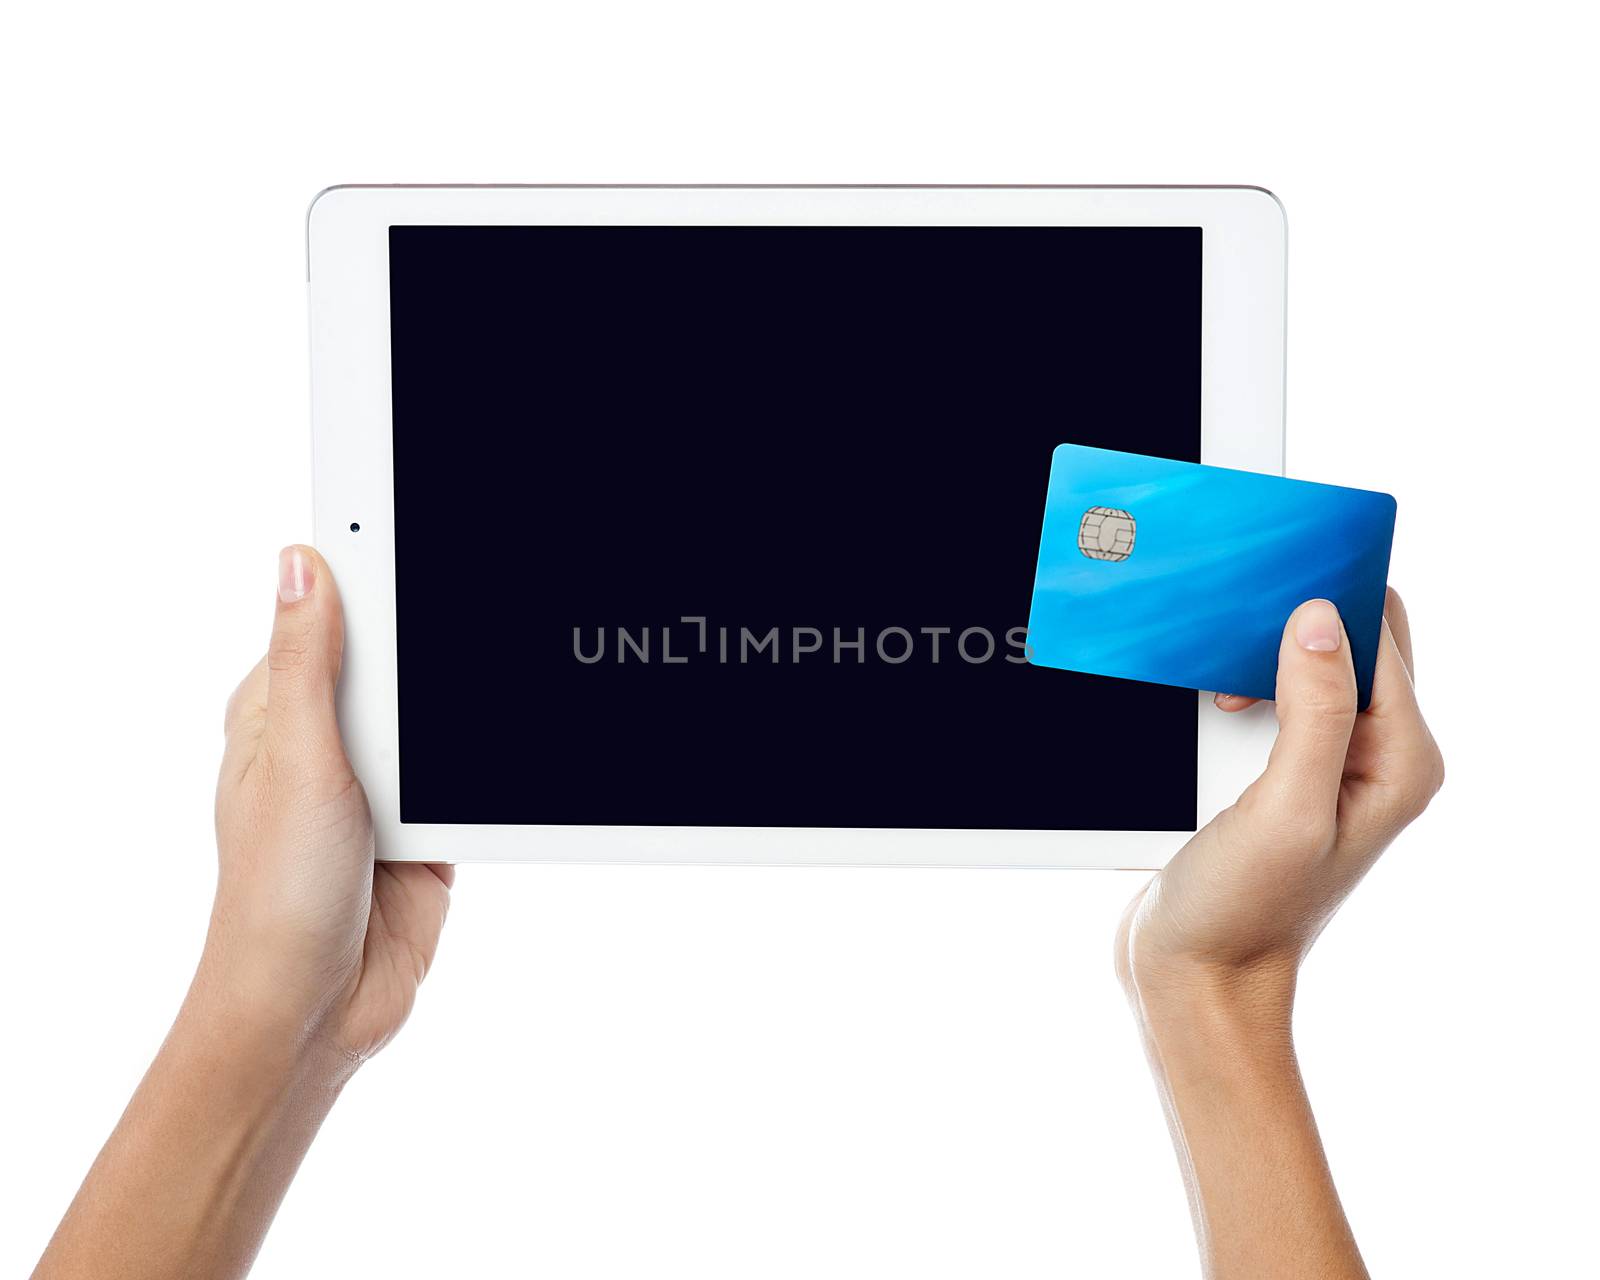 Human hands holding tablet pc and credit card by stockyimages